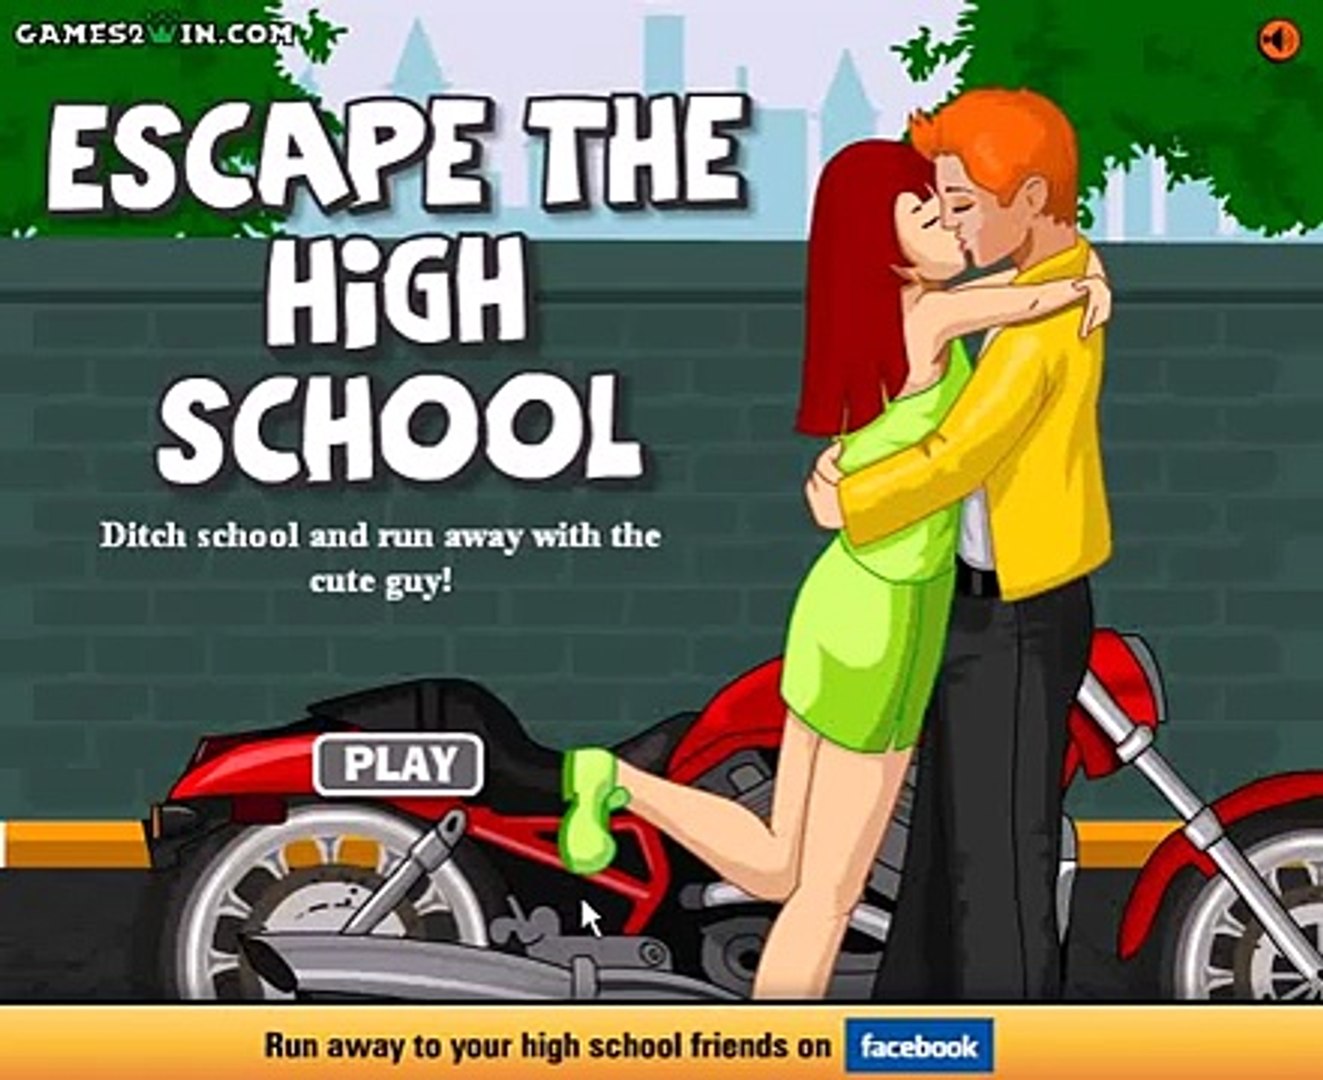 Escape The High School Games2win Video Dailymotion - she asked me to be her boyfriend roblox escape high school obby dailymotion video